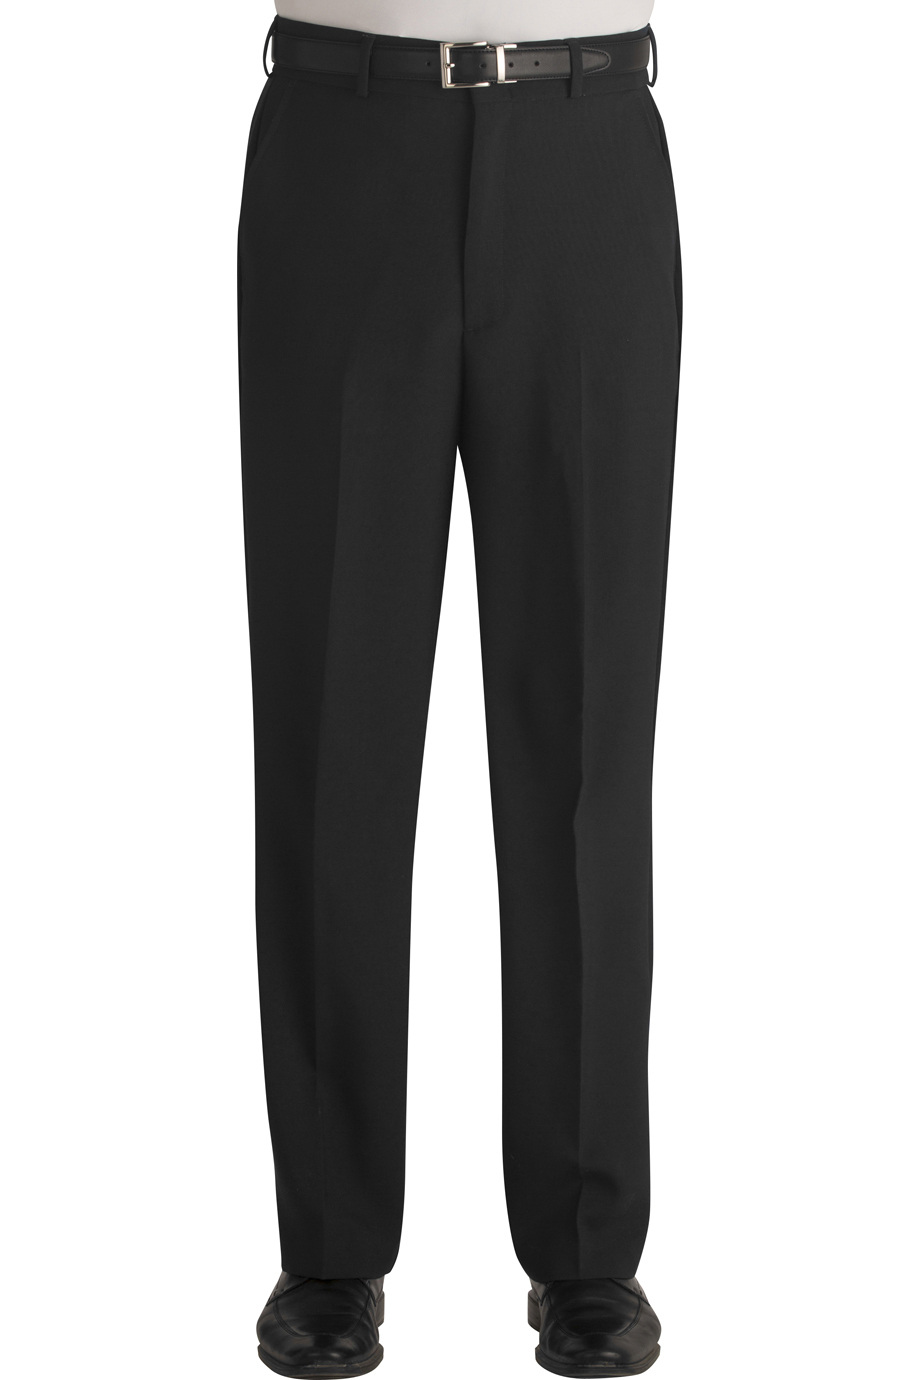 POLYESTER FLAT FRONT PANT